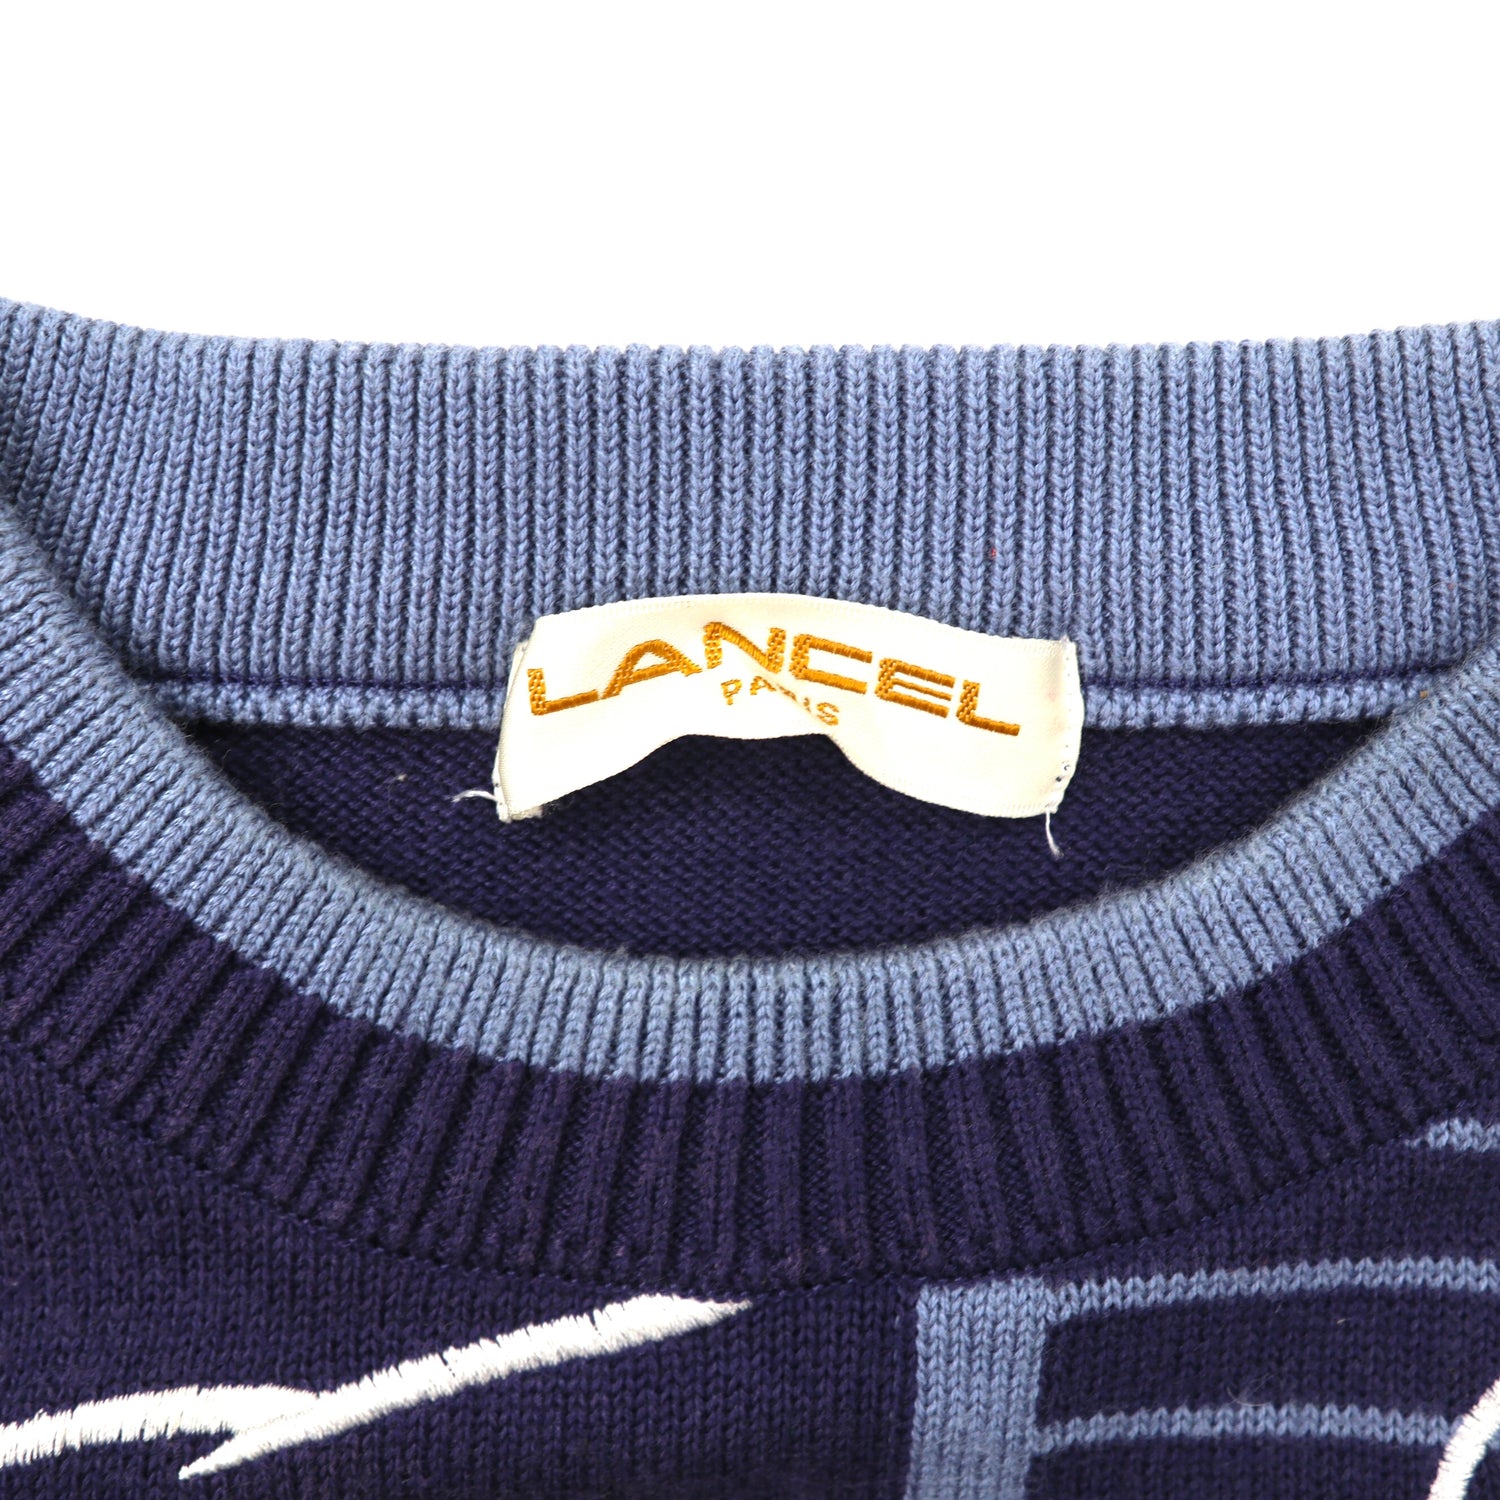 Lancel Knit Sweater L Navy Acrylic Character Embroidery 90s Japan